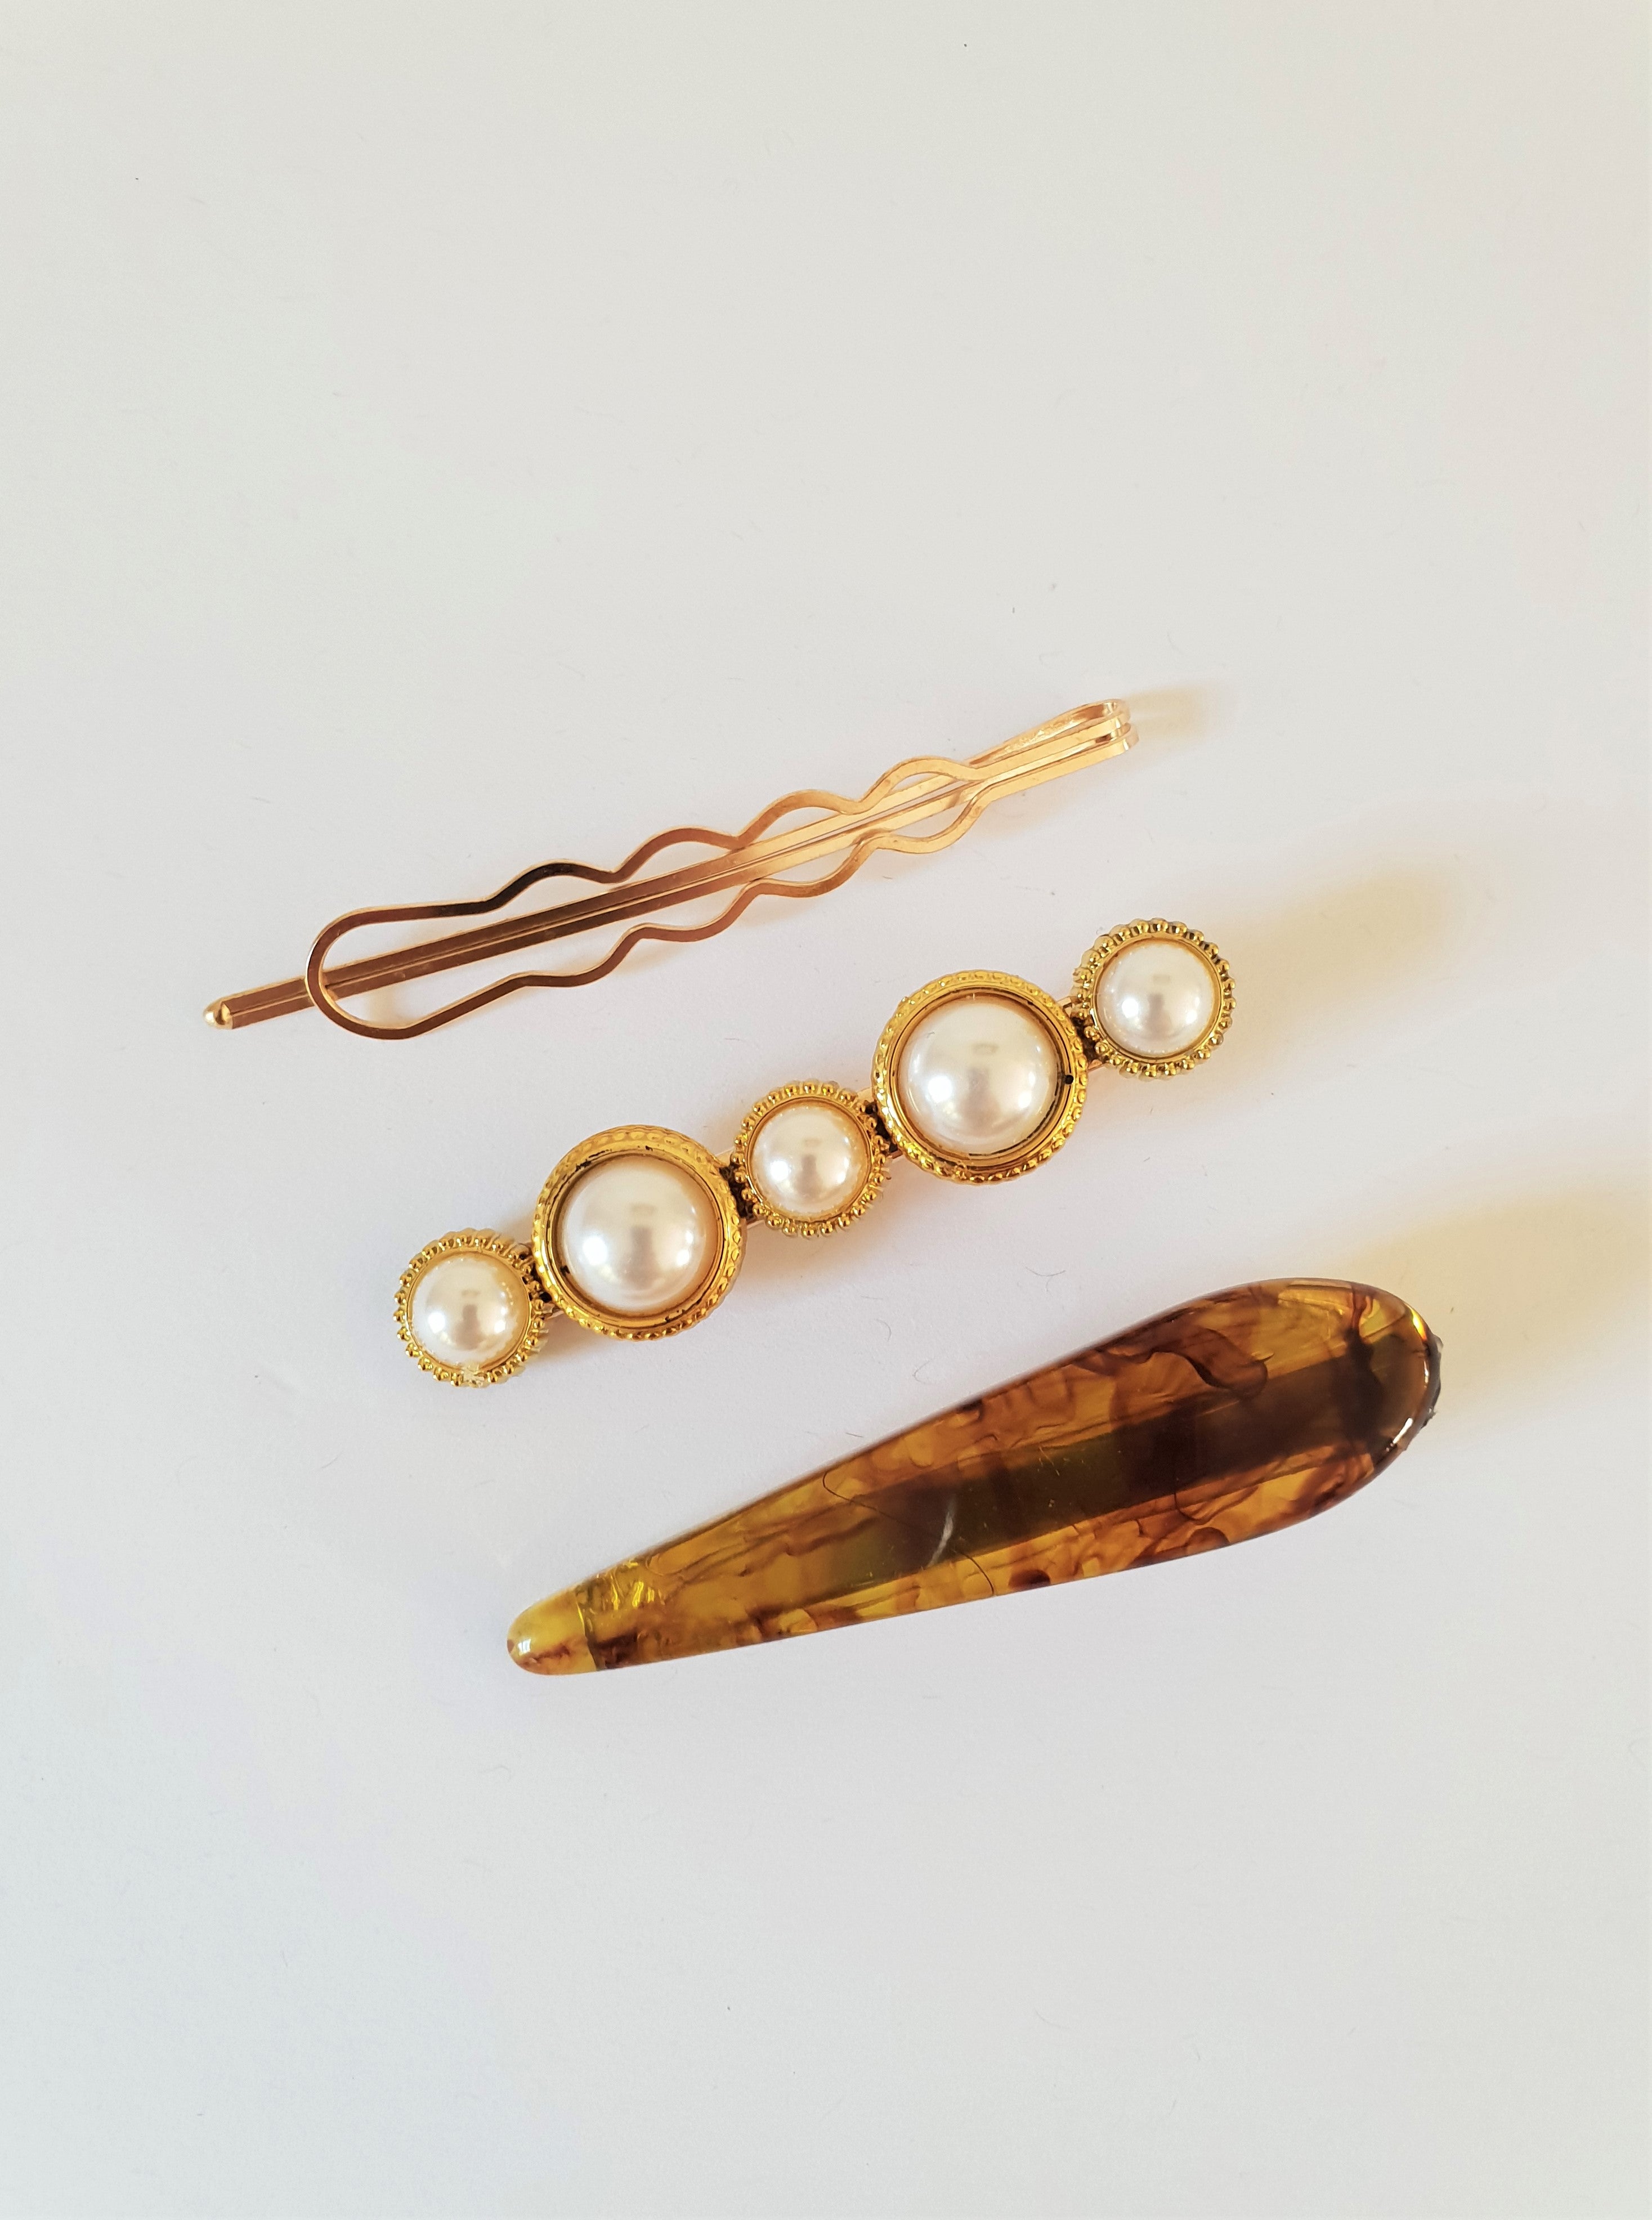 GOLD, PEARL AND RESIN HAIR CLIP SET - TORTOISE SHELL